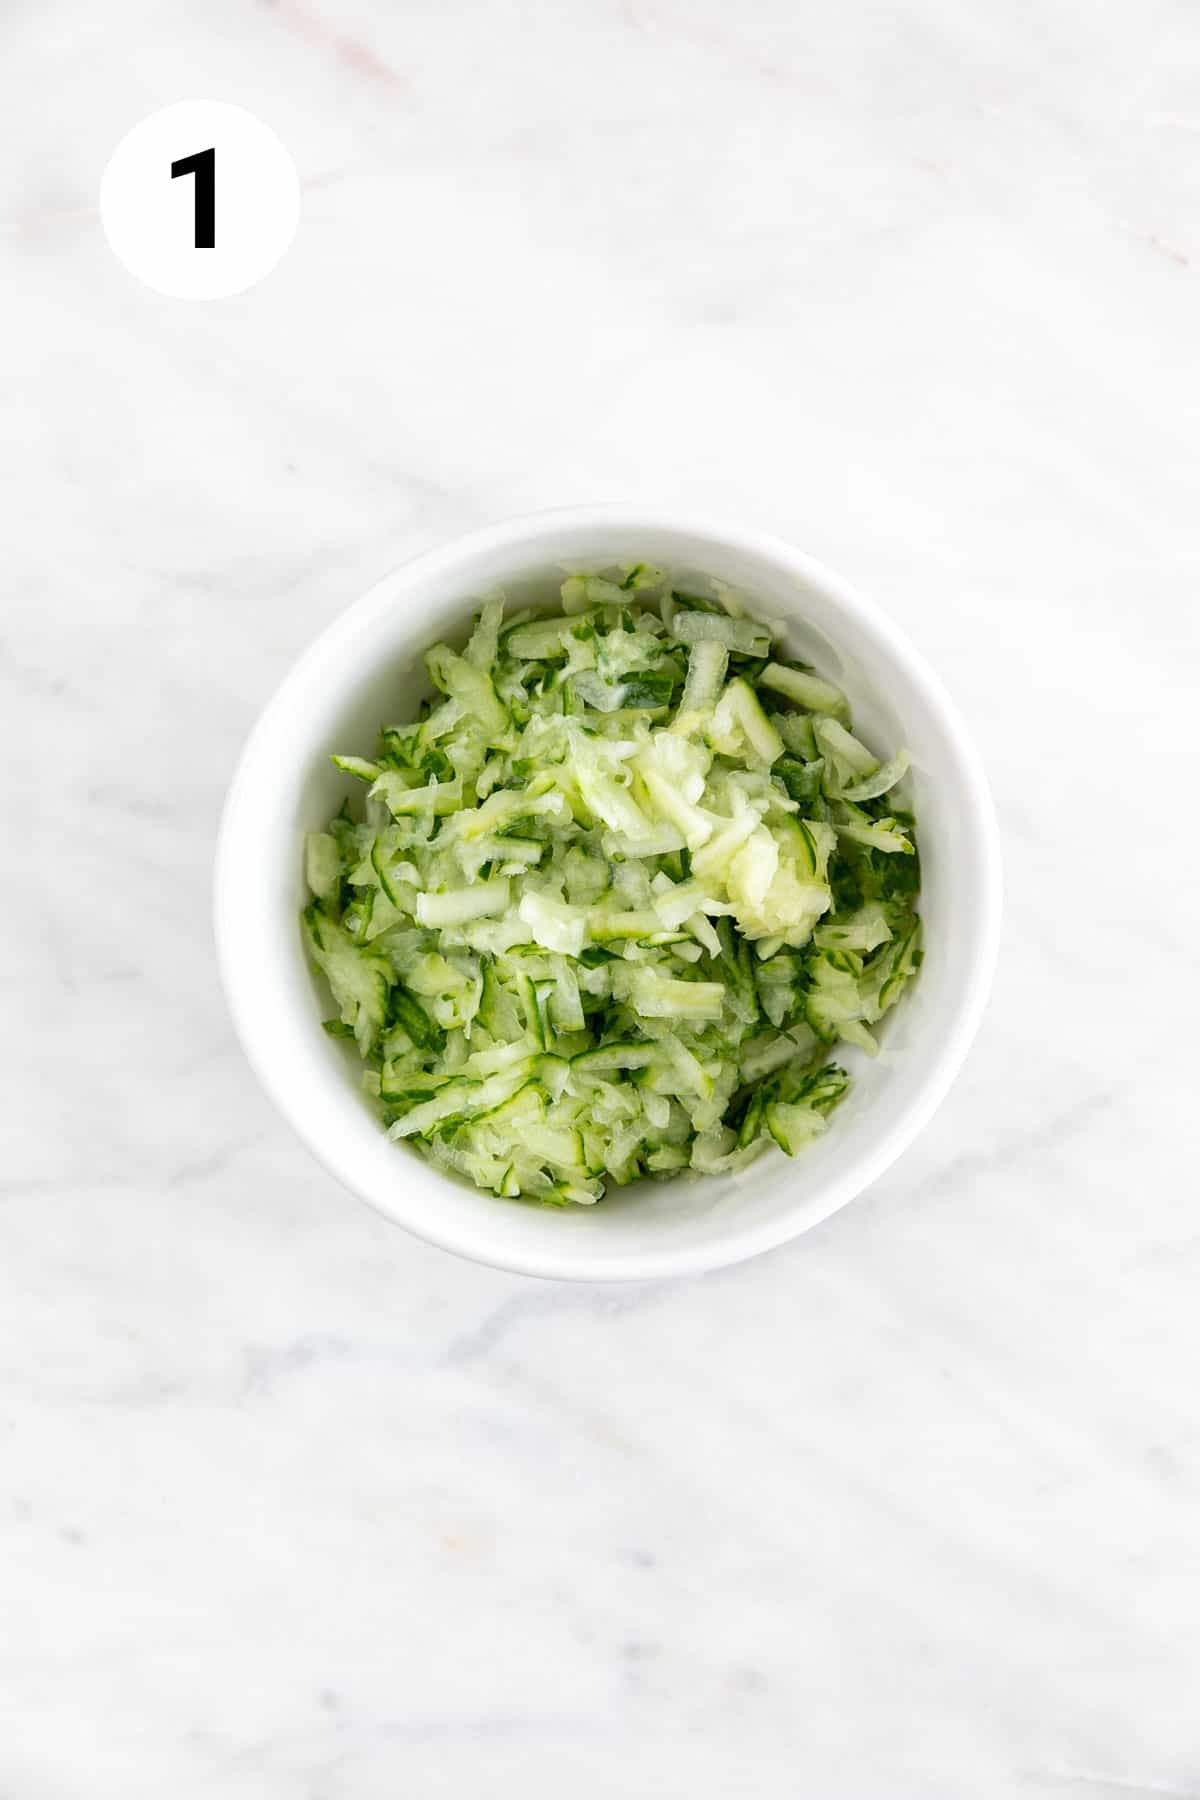 Grated cucumber in a white bowl.